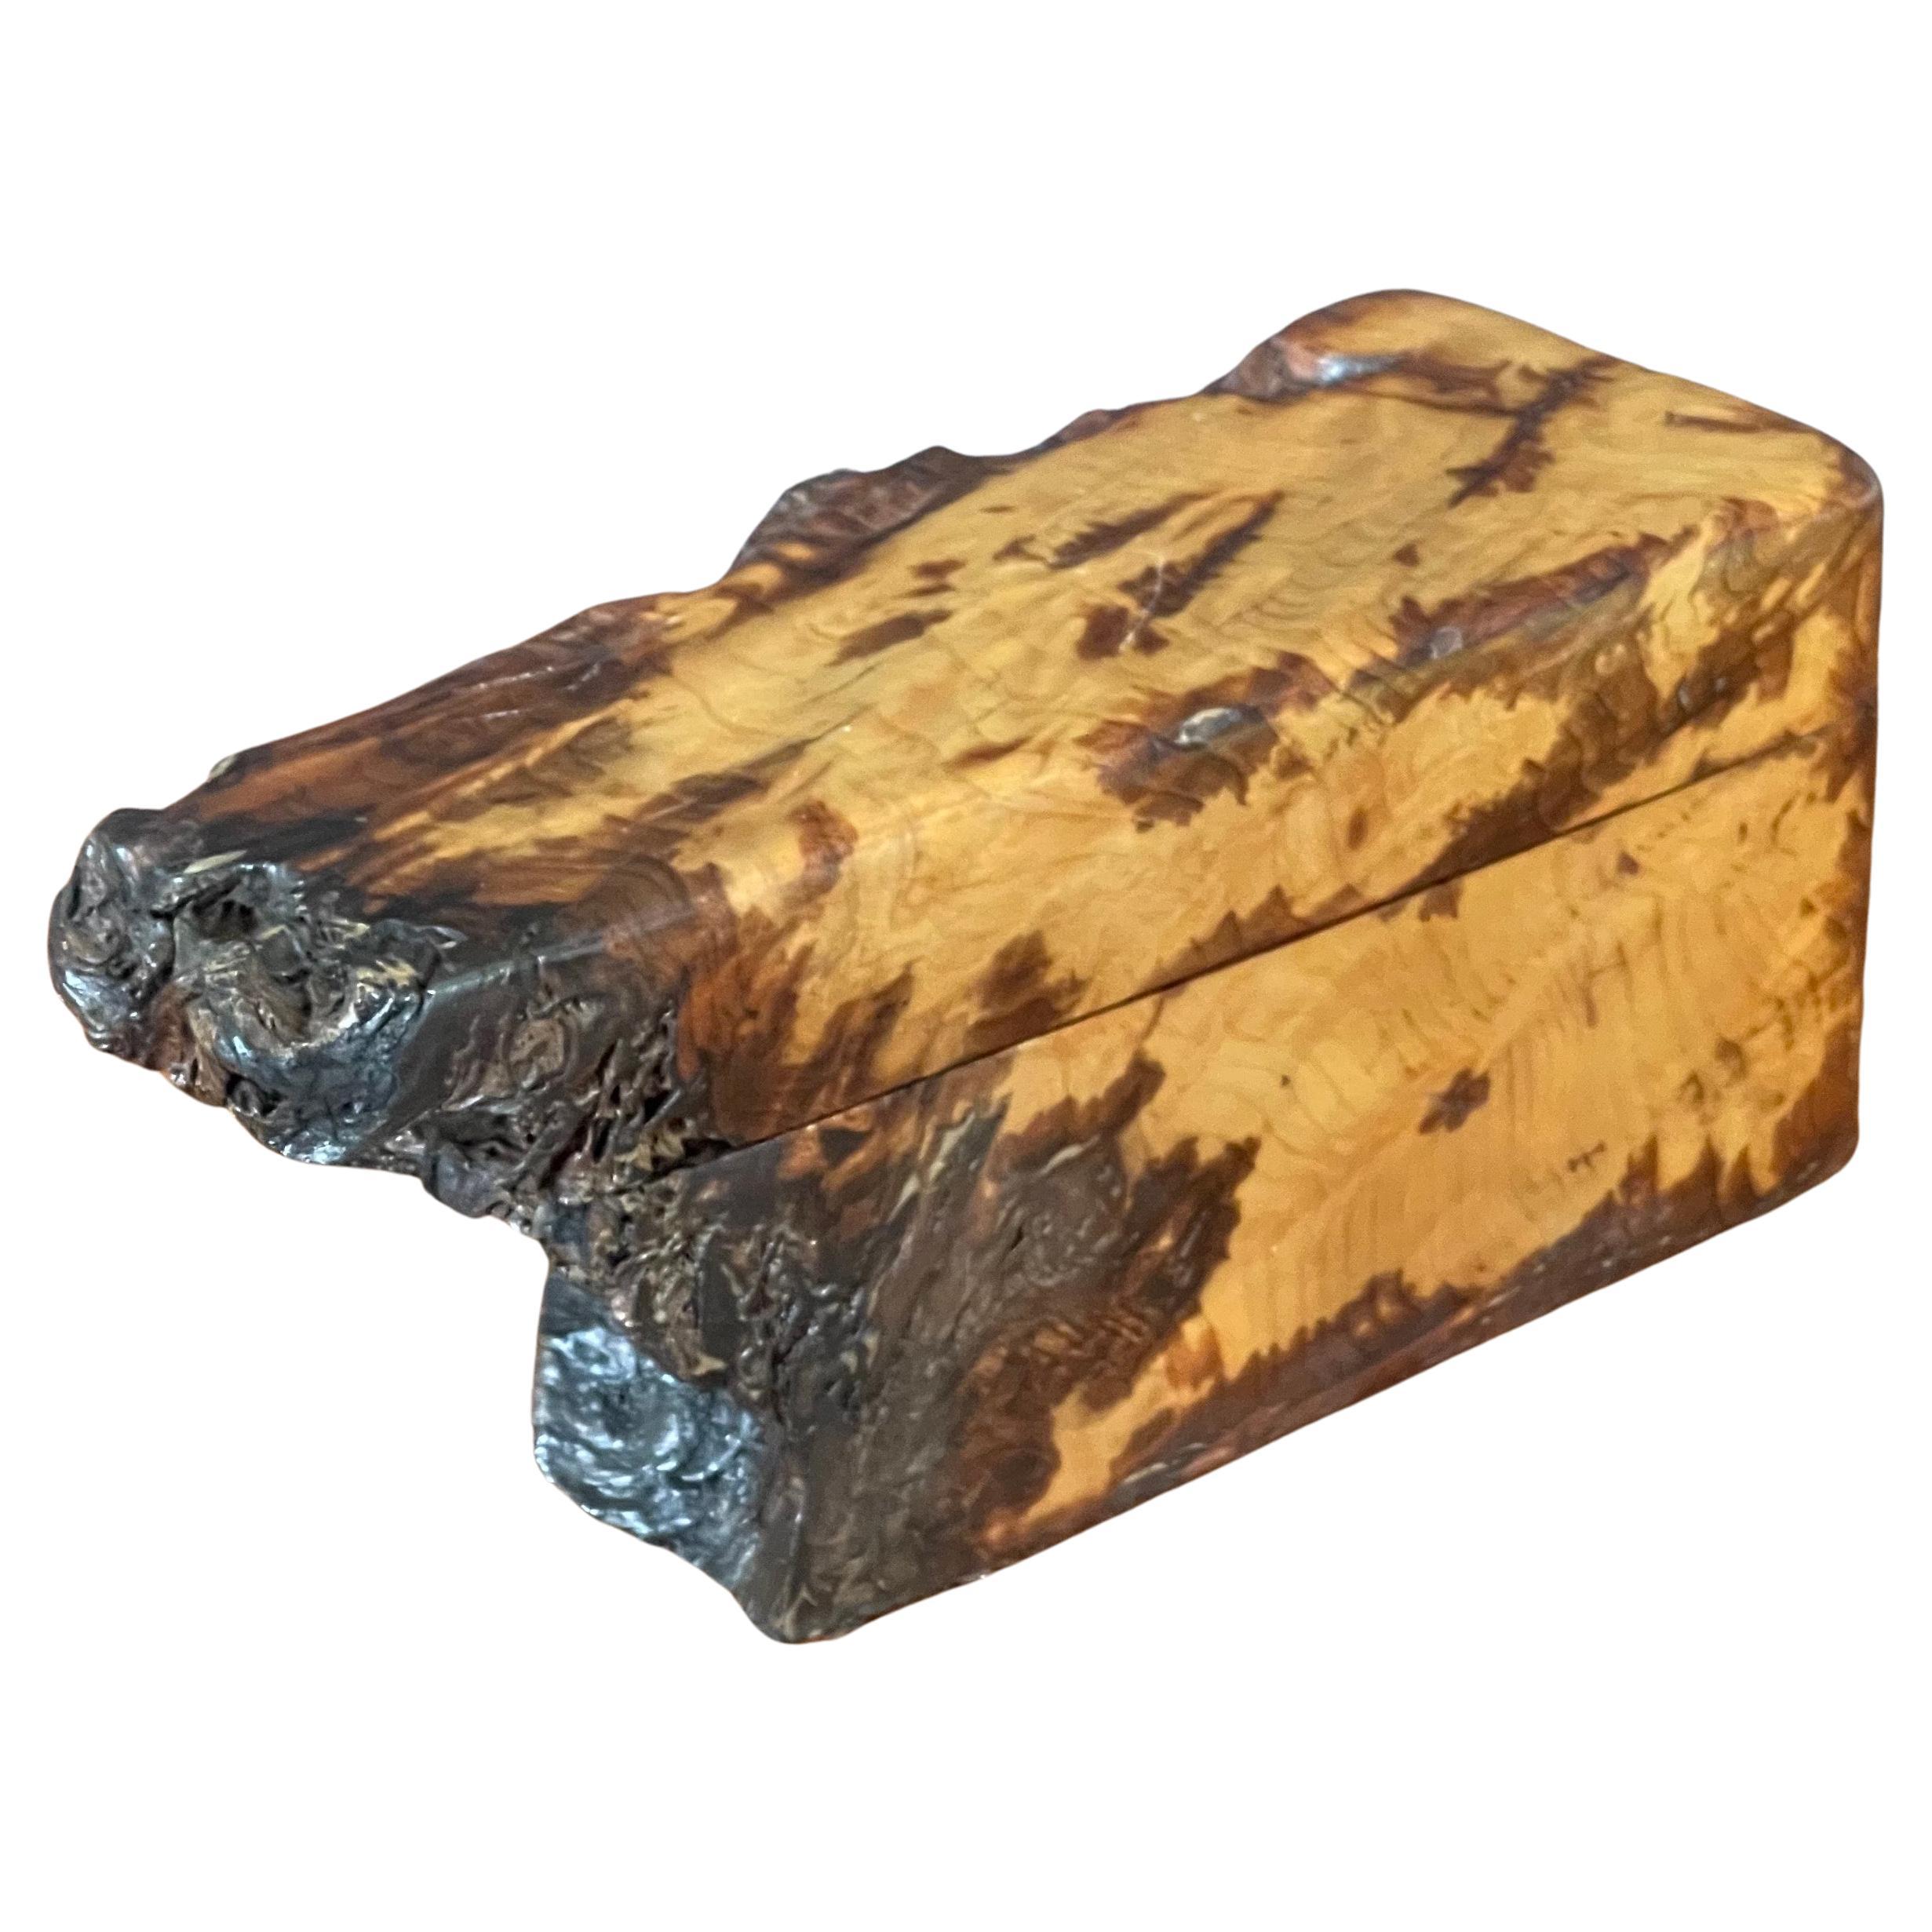 An unusual live edge burl wood trinket box, circa 1980s. The box has a removable lid and is in great vintage condition; it measures 8.75